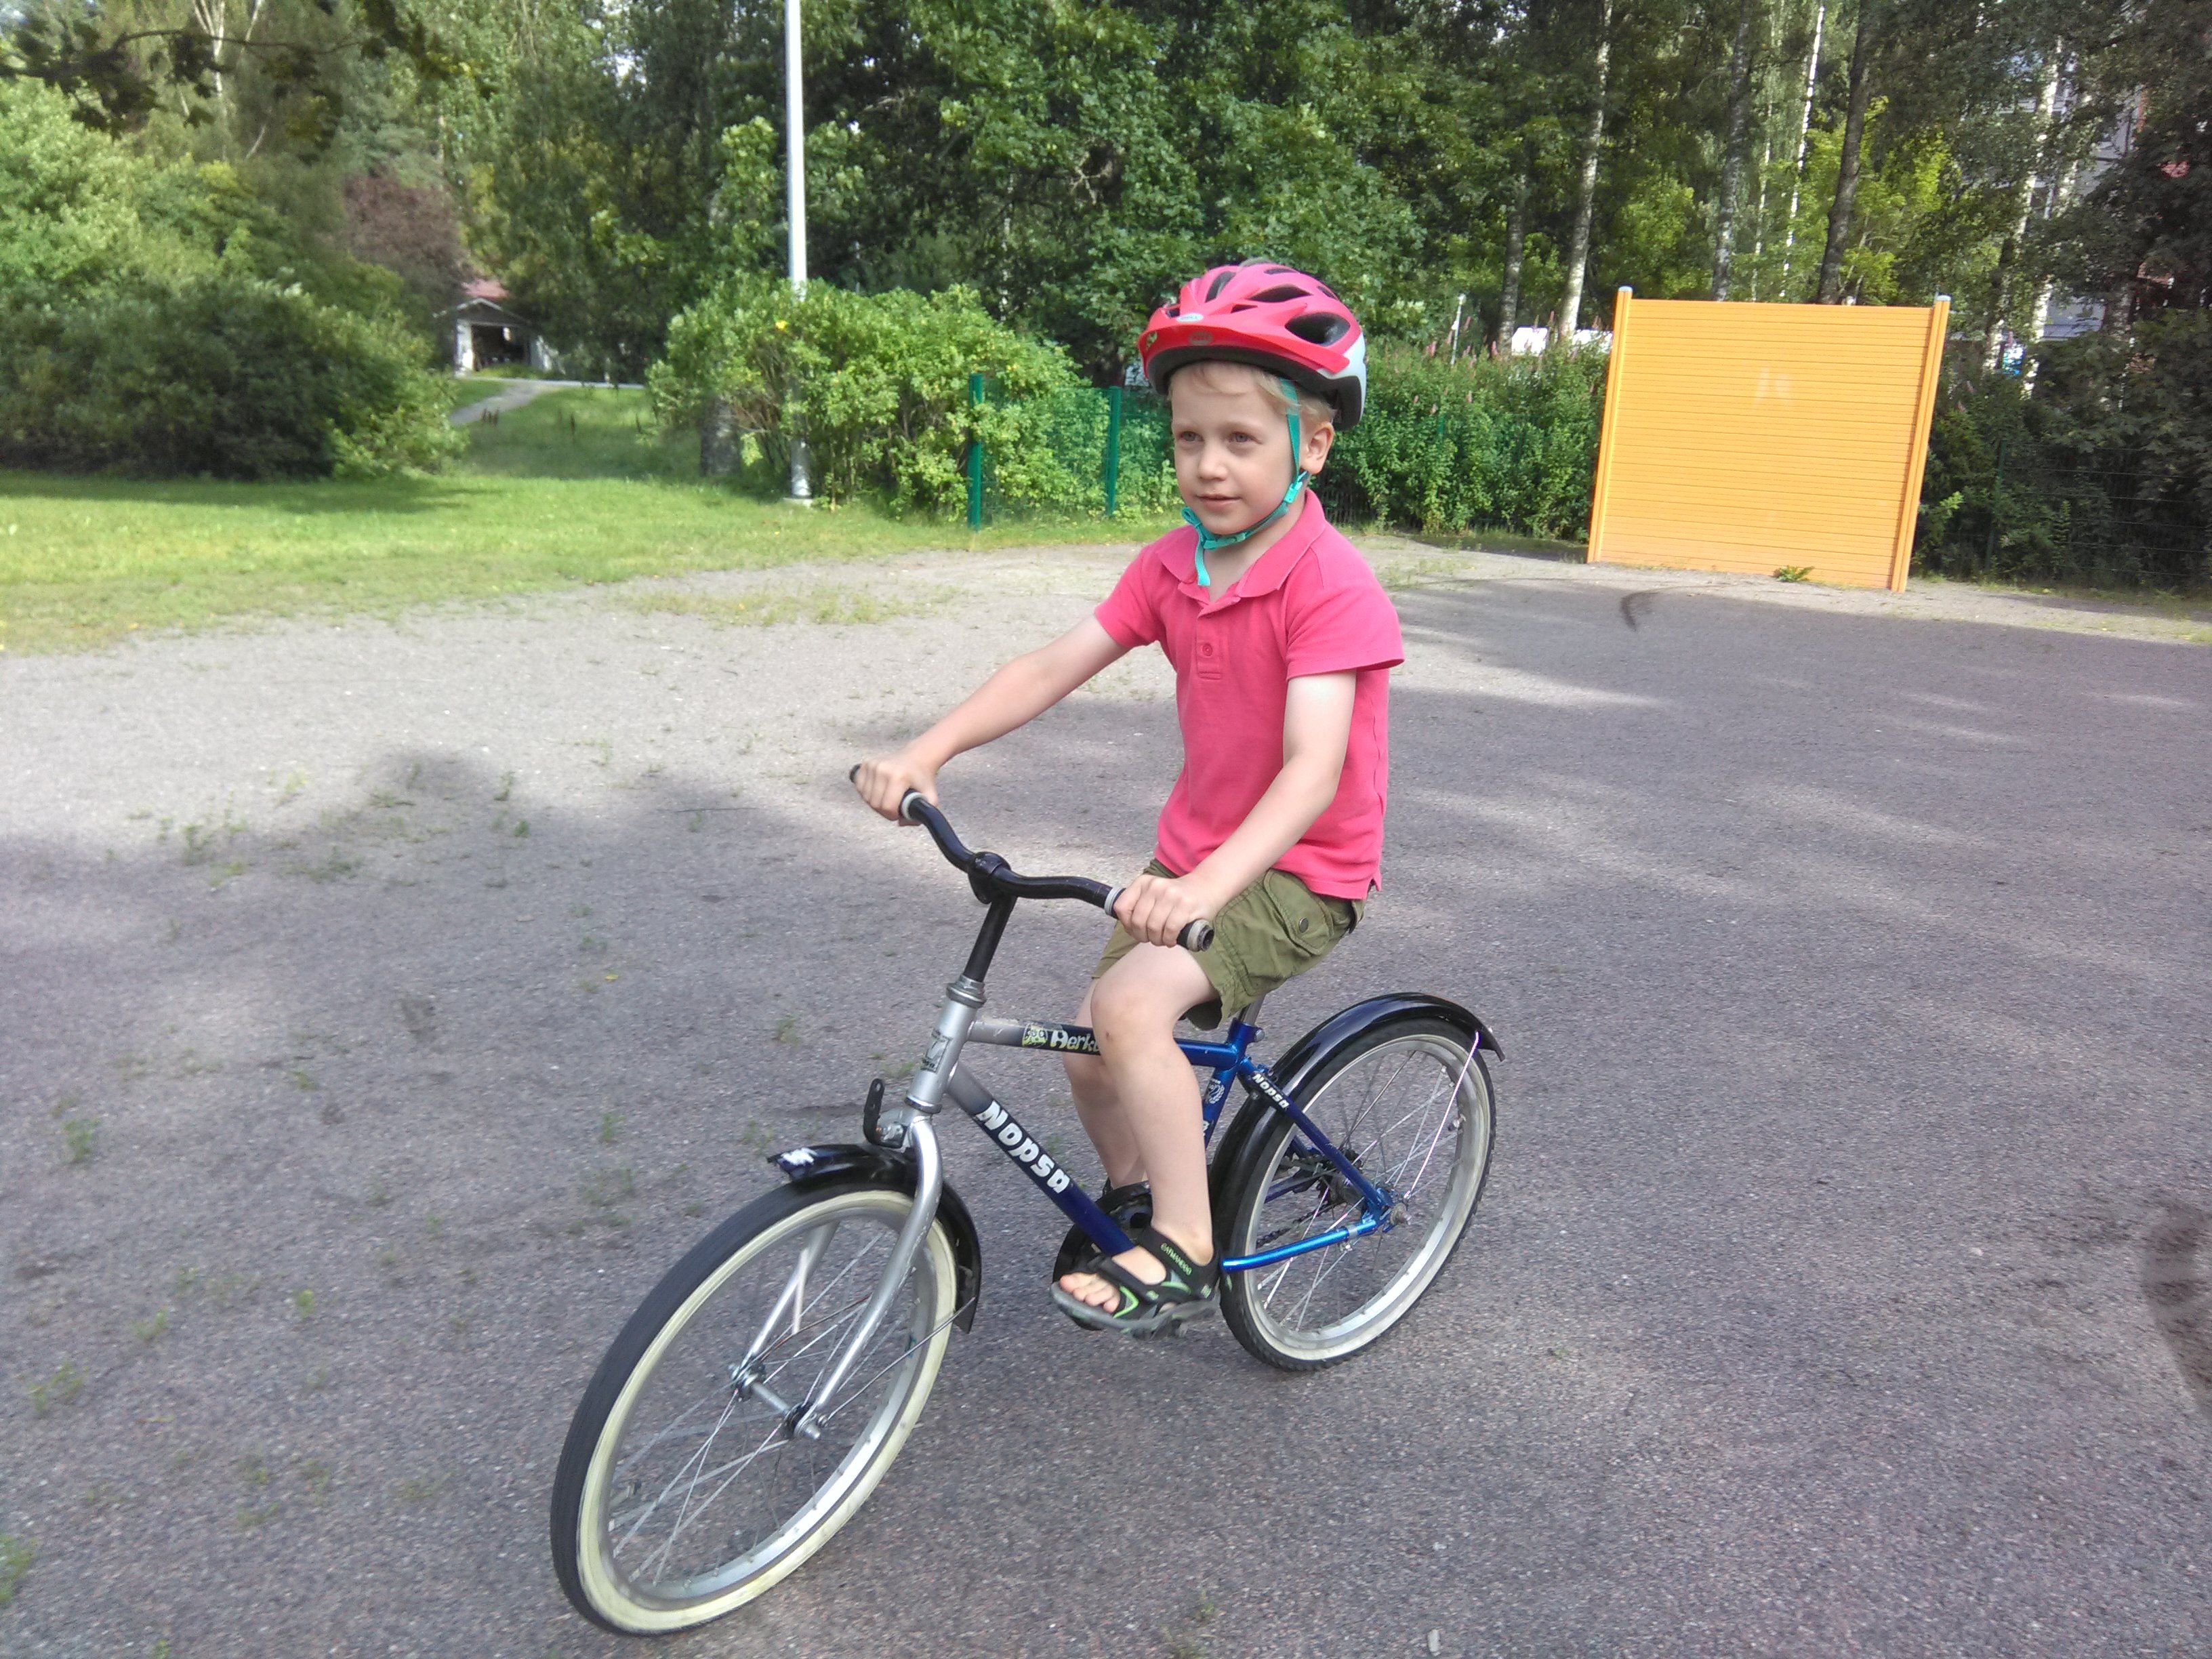 First ride without training wheels (56/365)